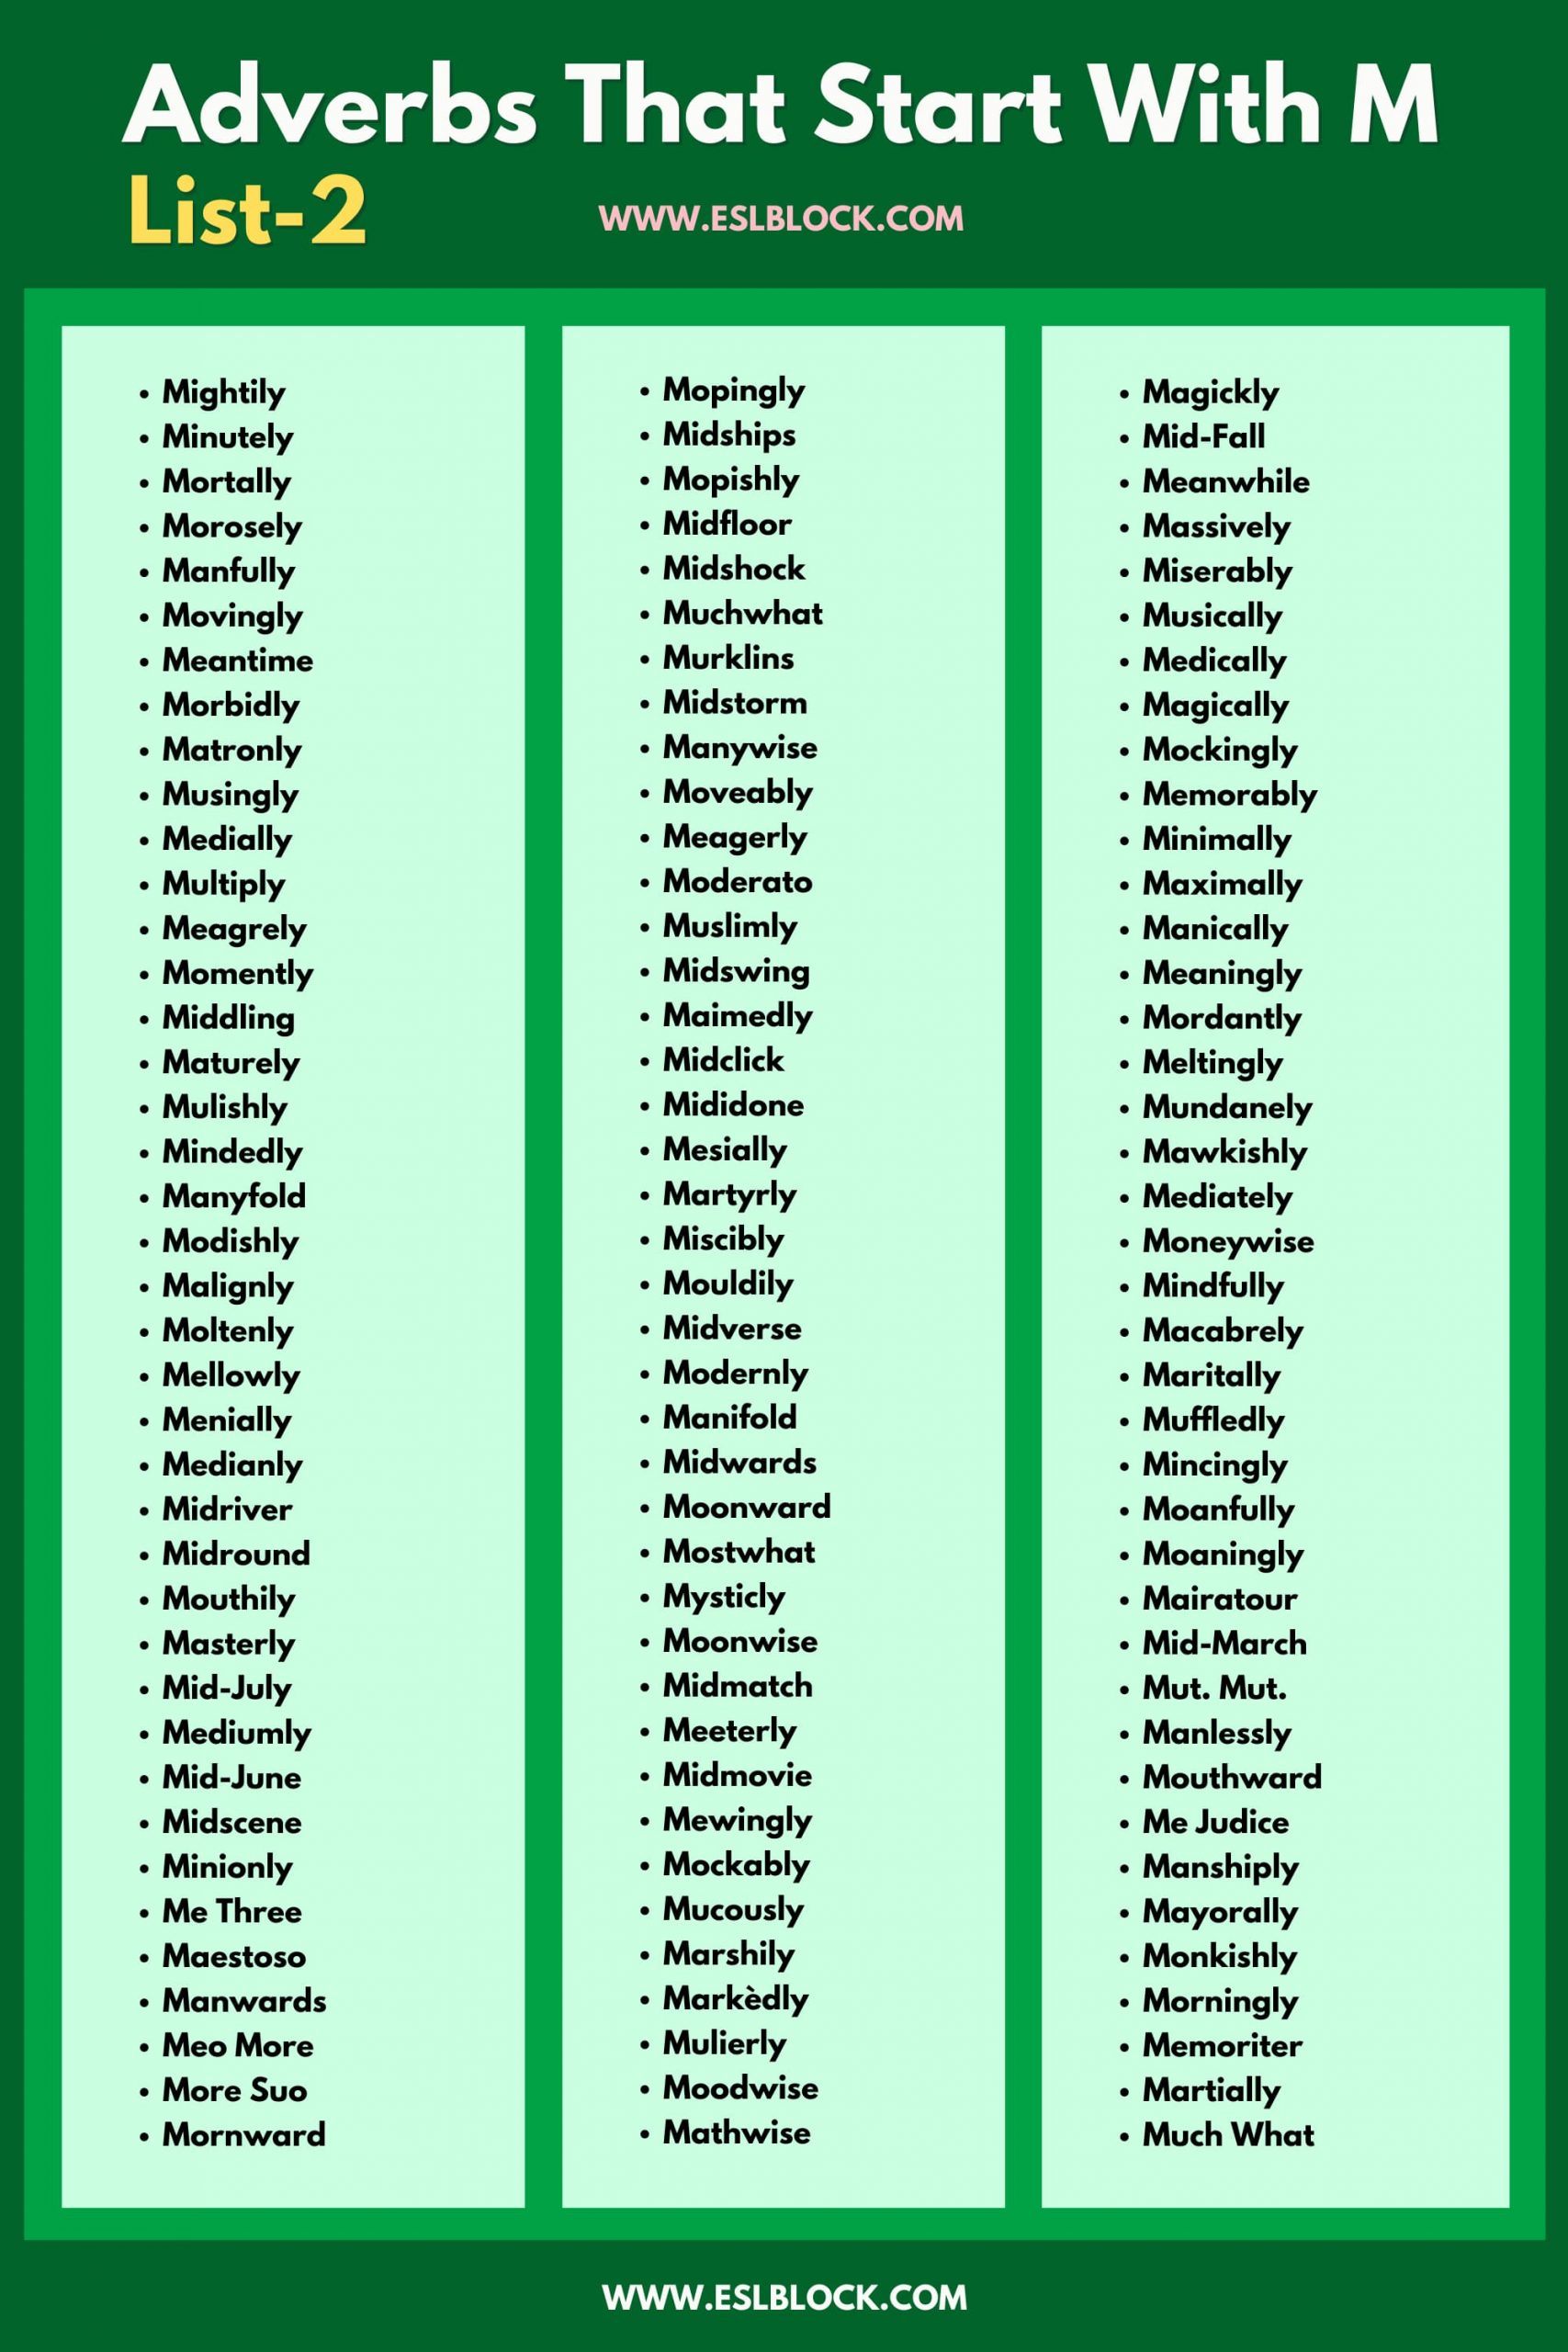 100 Example Sentences Using Adverbs, 4 Letter Adverbs That Start with M, 4 Letter Words, 5 Letter Adverbs That Start with M, 5 Letter Words, 6 Letter Adverbs That Start with M, 6 Letter Words, A to Z Adverbs, AA Adverbs, Adverb vocabulary words, Adverbs, Adverbs That Start with M, Adverbs with Example Sentences, All Adverbs, Types of Adverbs, Types of Adverbs with Example Sentences, Vocabulary, What are Adverbs, What are the types of Adverbs, Words That with M